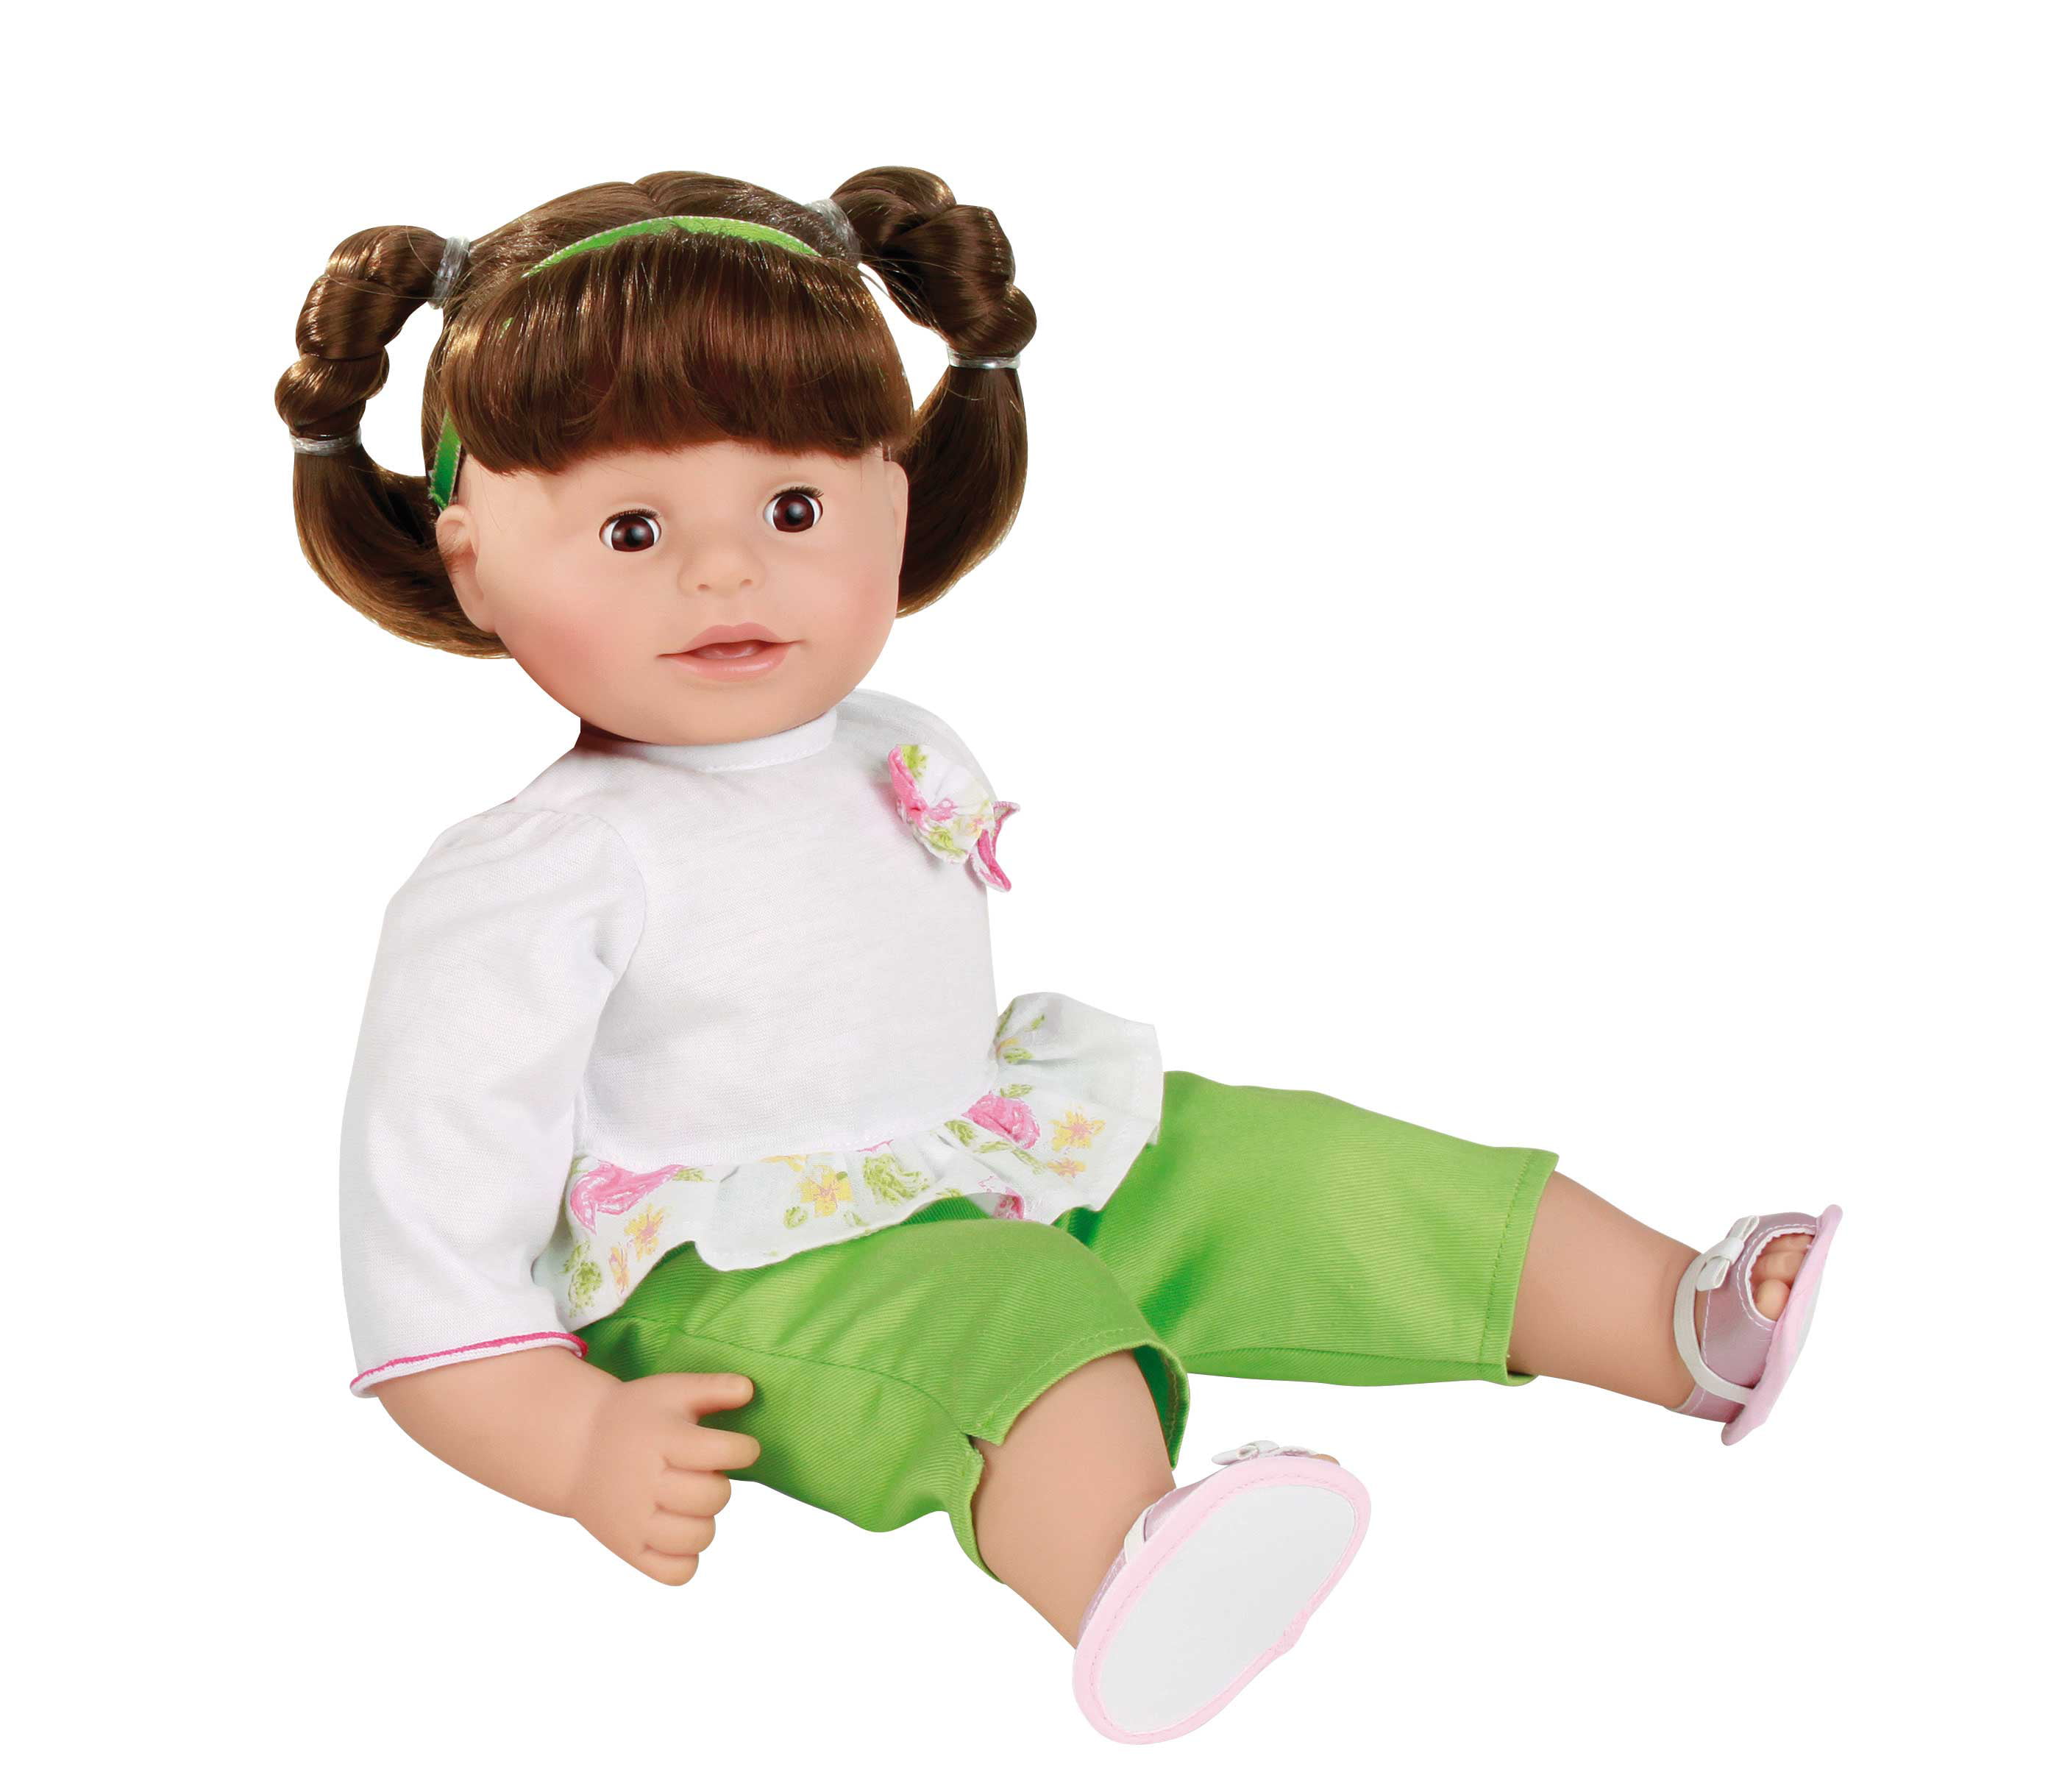 Gotz Maxy Muffin Baby Doll With Brown Hair In Pigtails And Brown